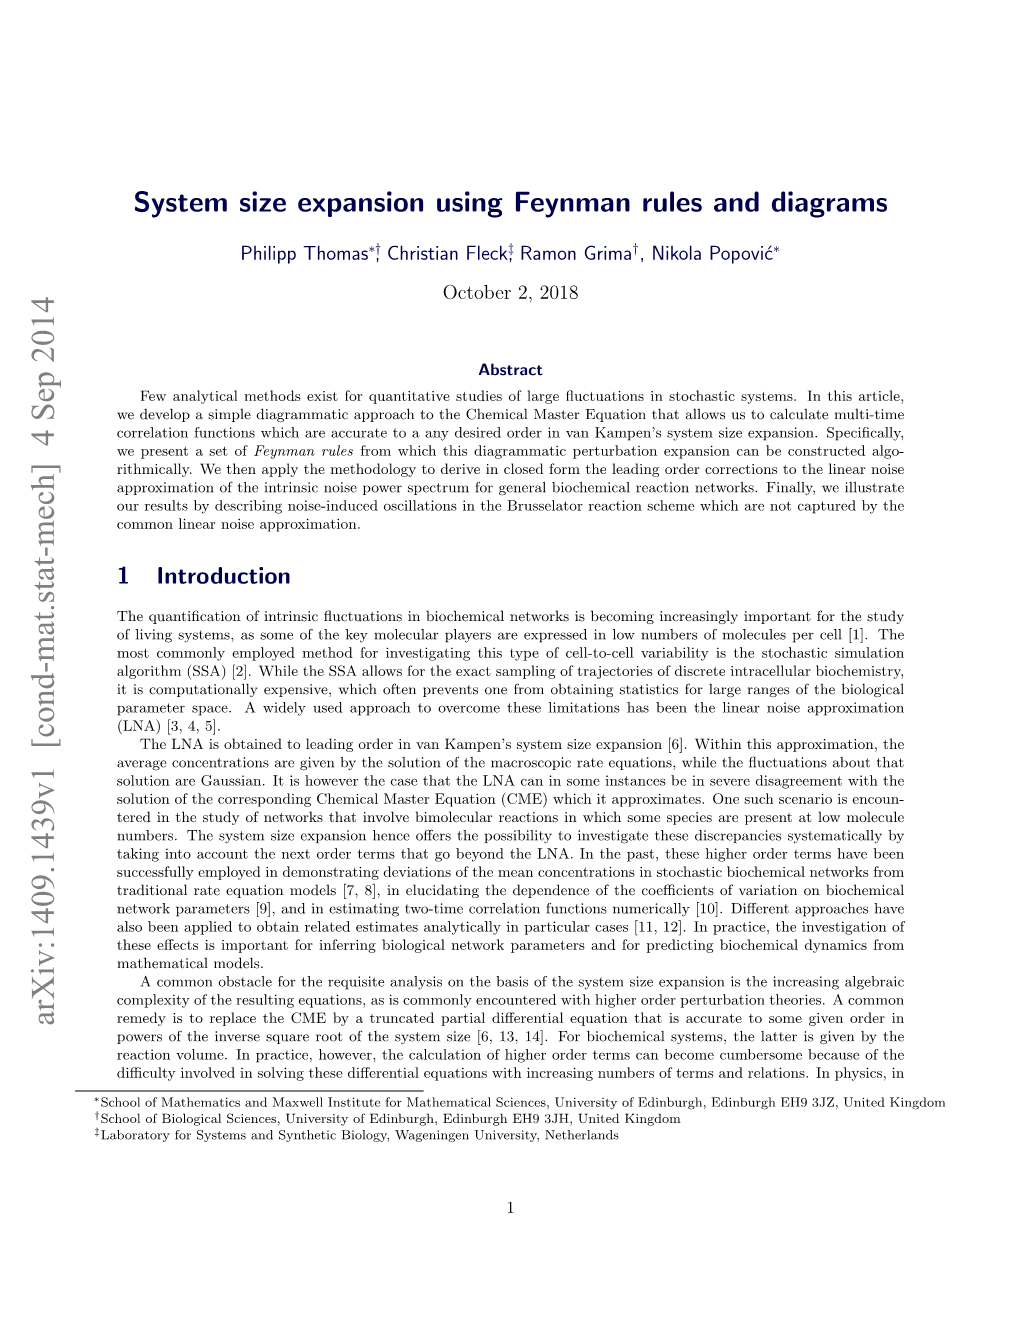 System Size Expansion Using Feynman Rules and Diagrams